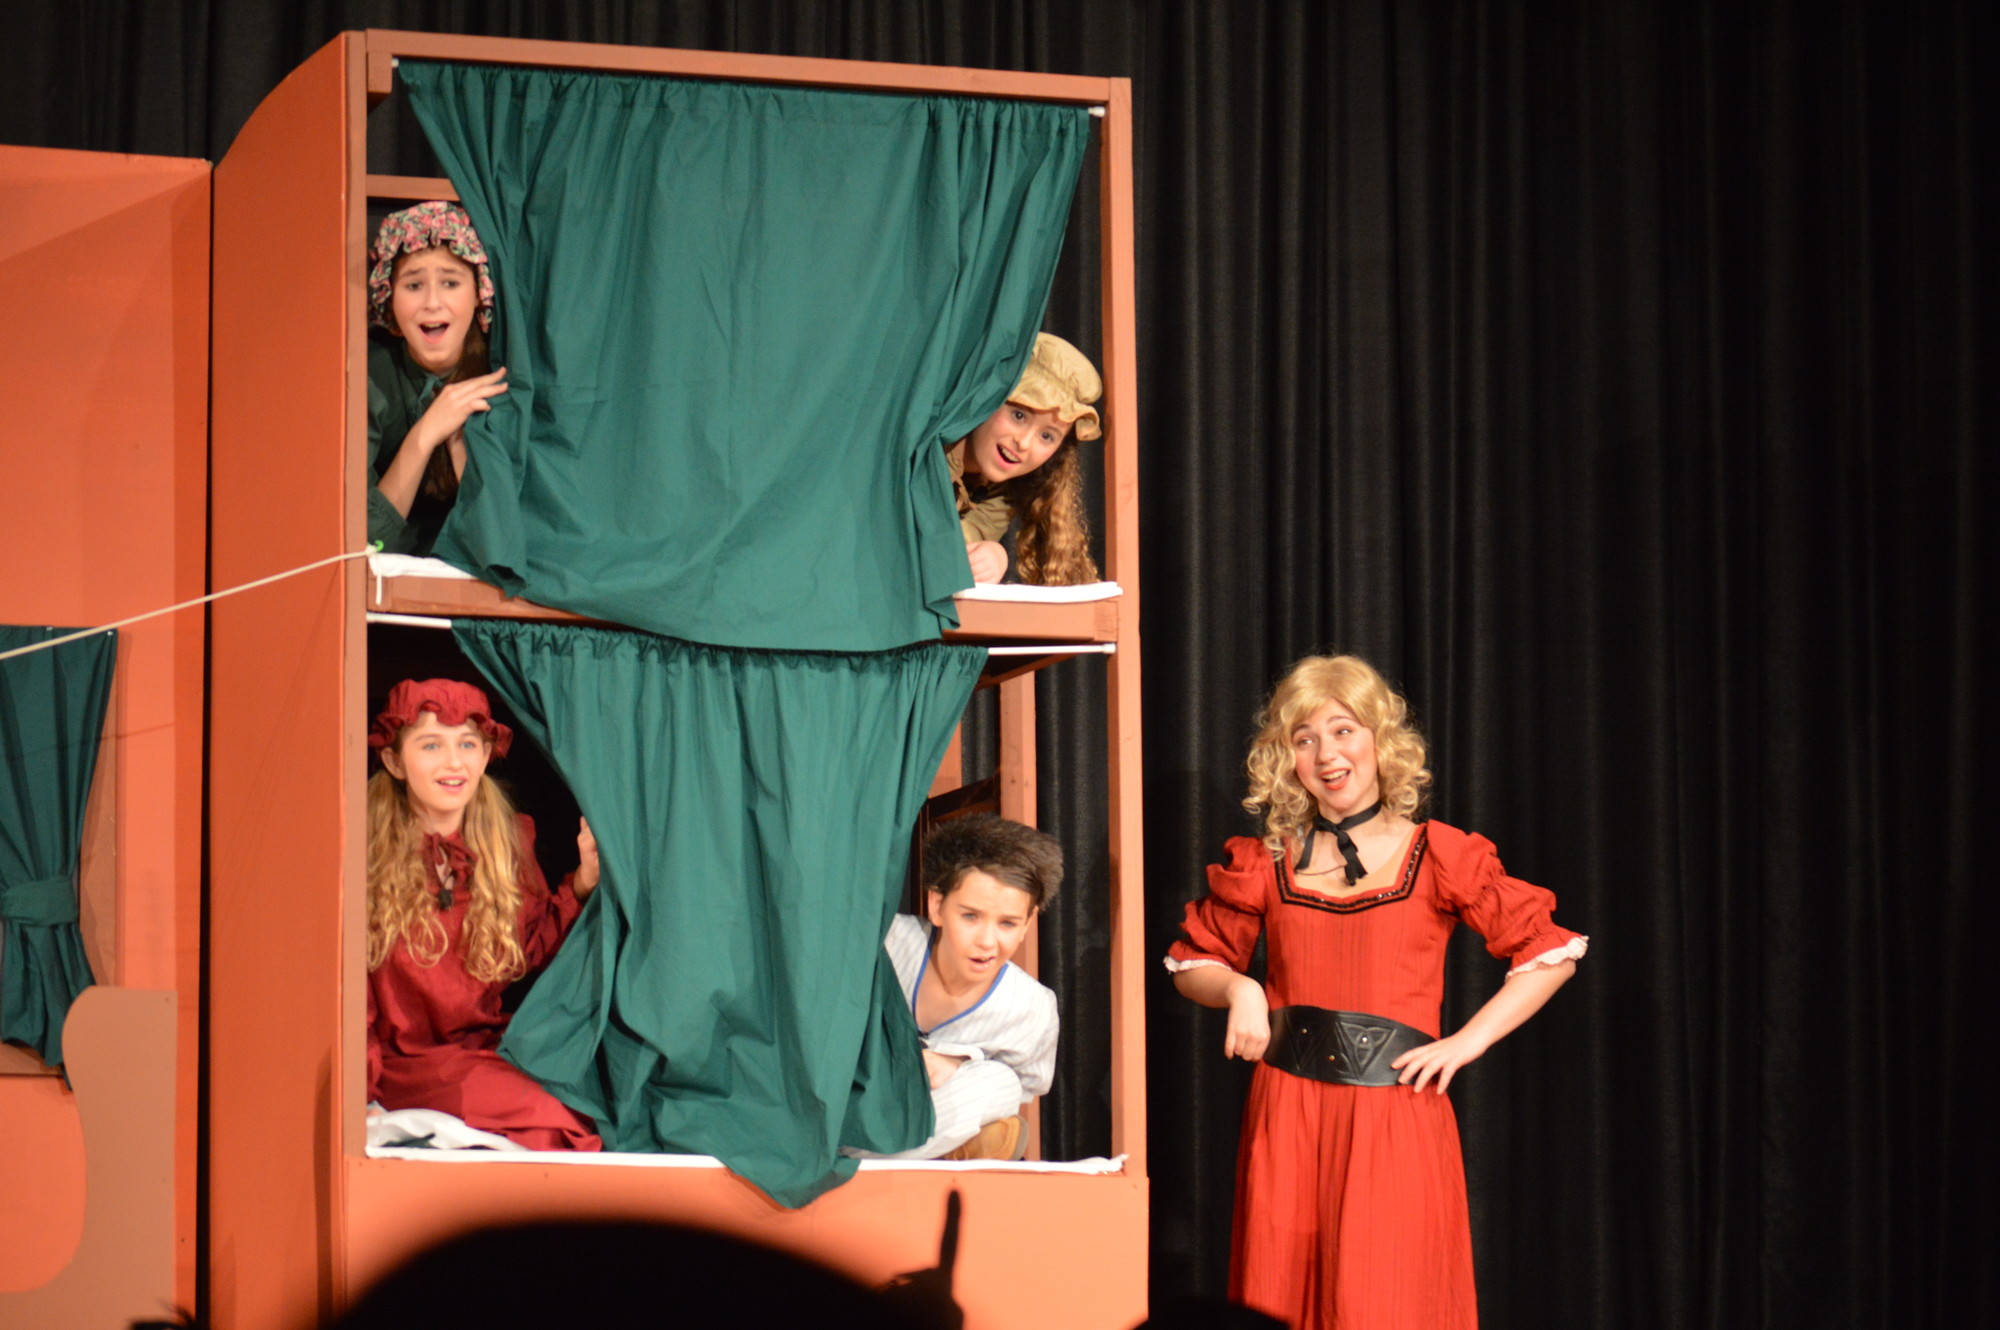 Rebecca Goldfarb, who played Annie Oakley, performs with Mikayla Gross and Thanae Stoupas in the top bunk with Makayla Carlins and Ryan Aizer in the bottom bunk.